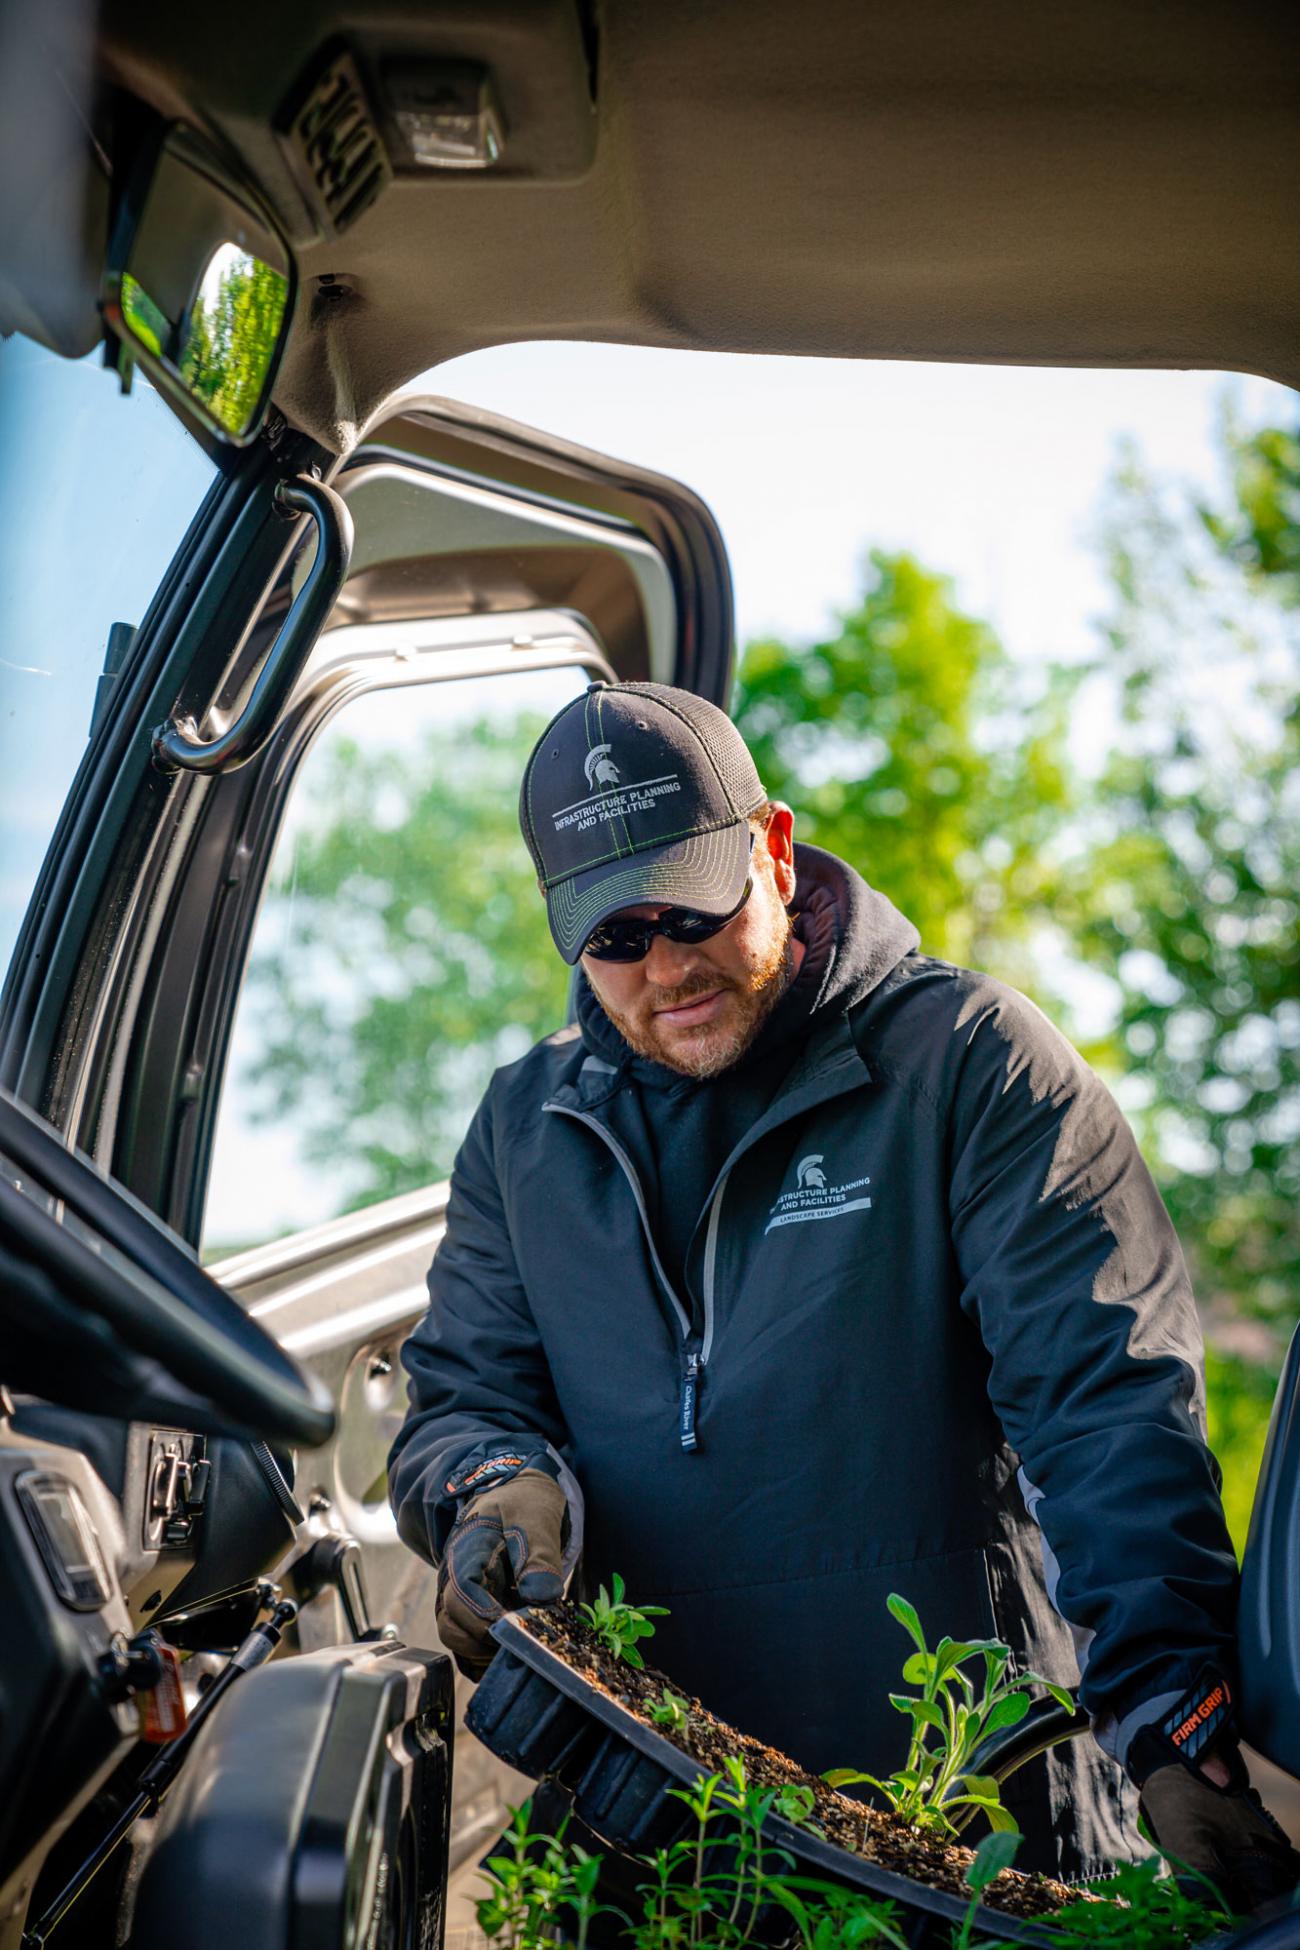 Josh Ridner wearing an IPF hat and jacket removes plant starters from a vehicle